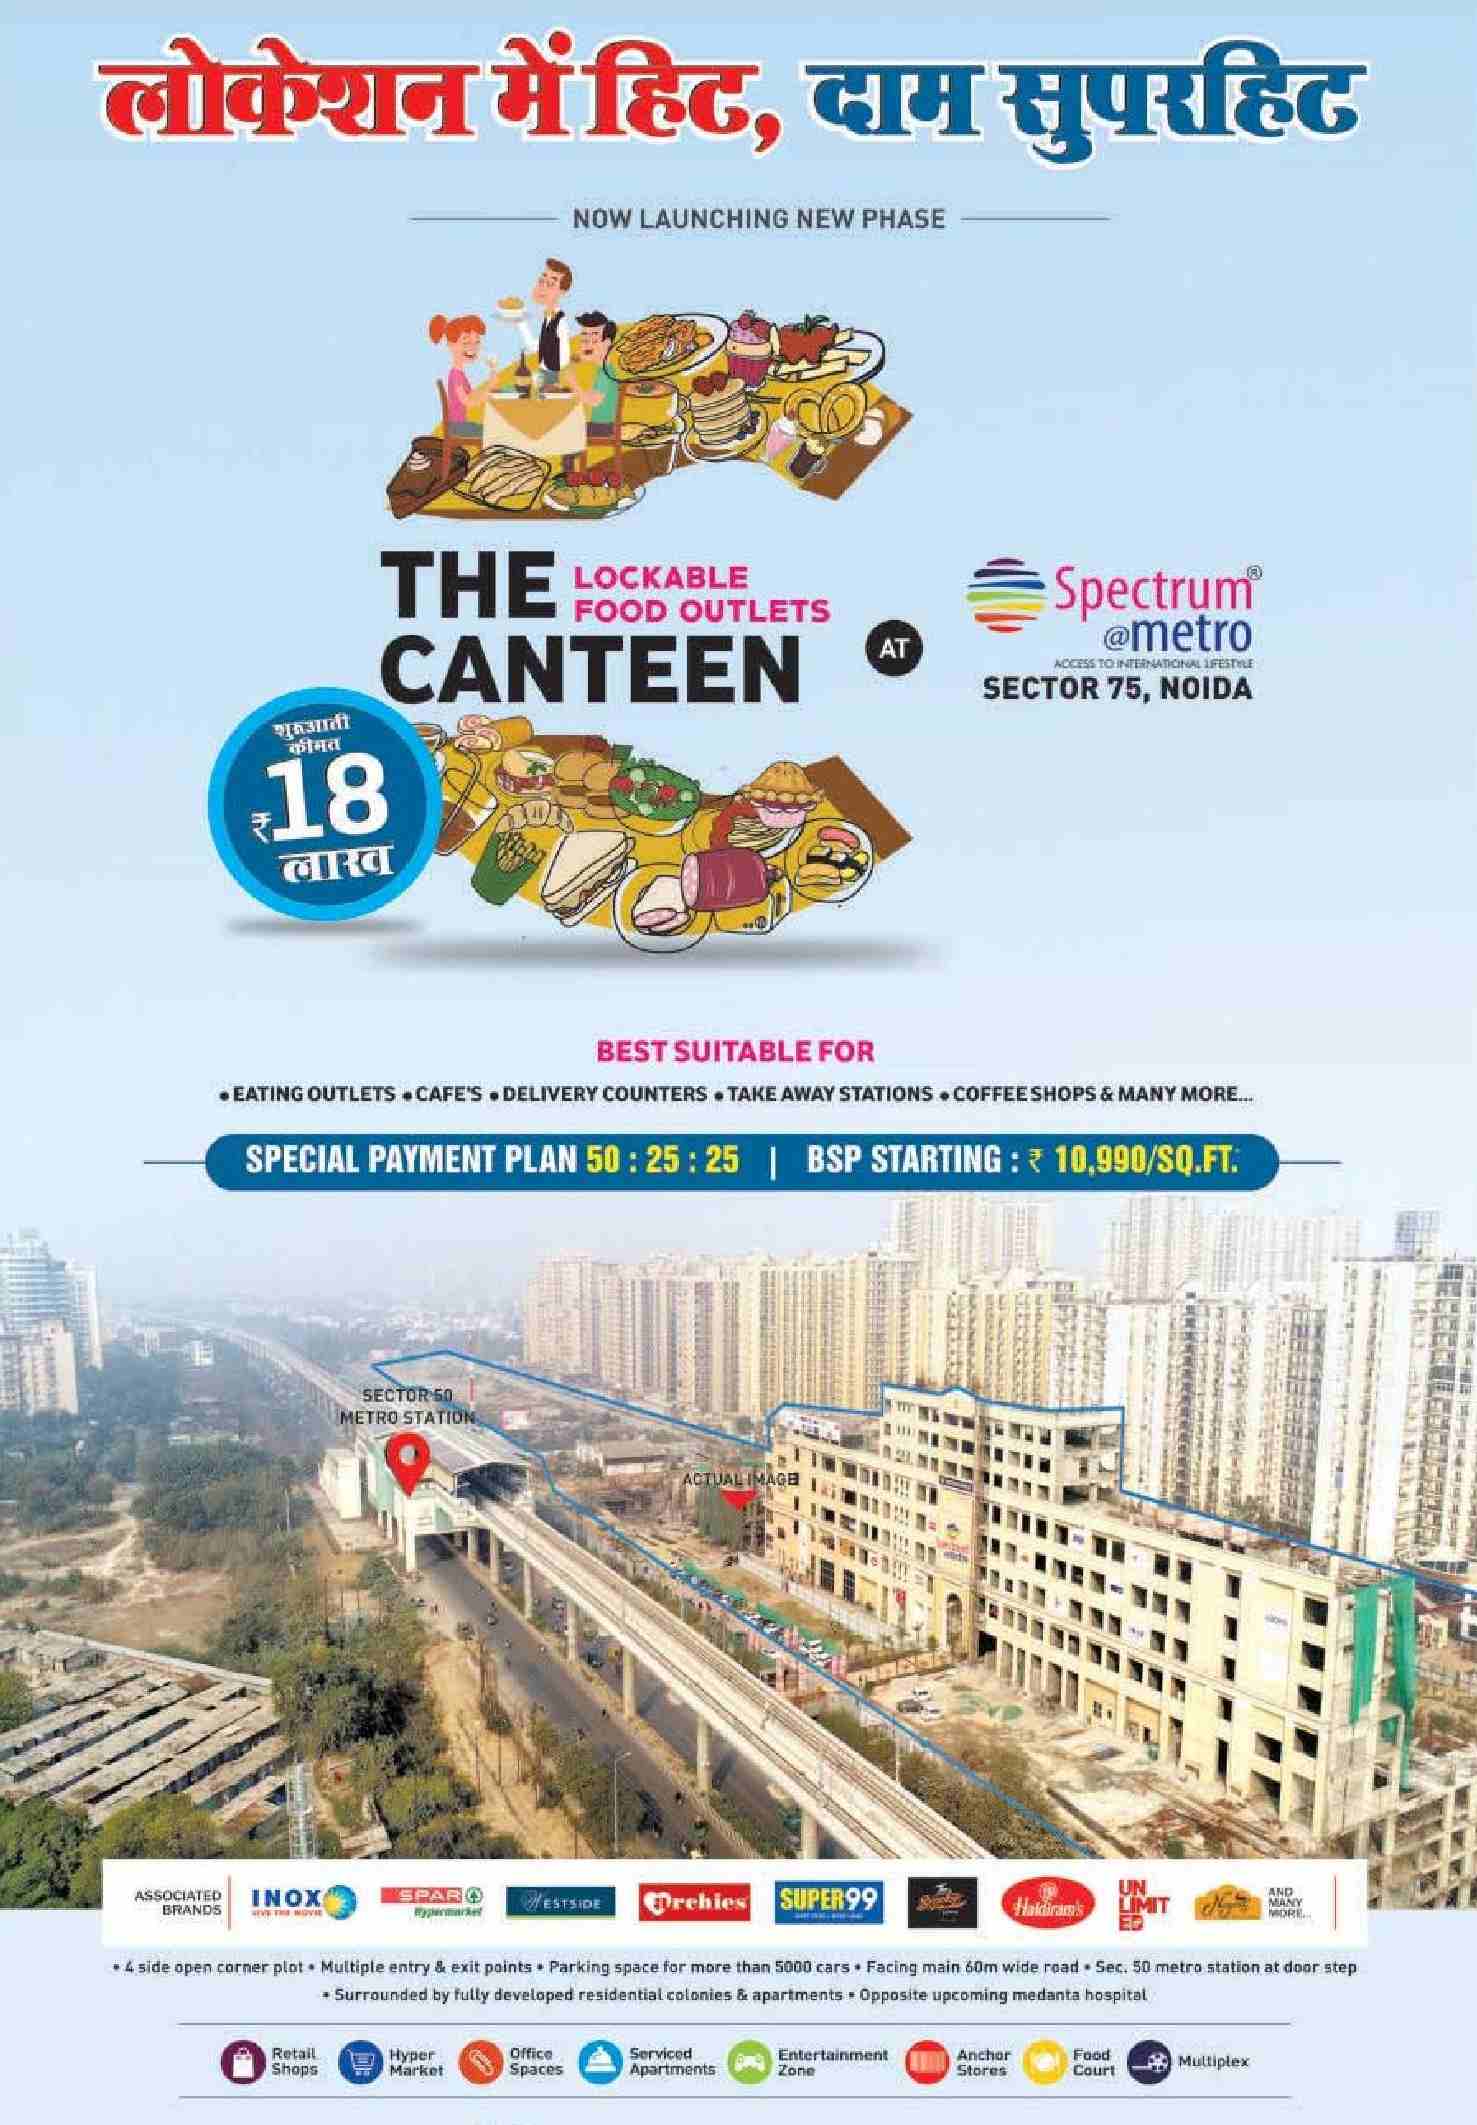 Avail special payment plan of 50:25:25 at Blue Spectrum Metro in Sector 75, Noida